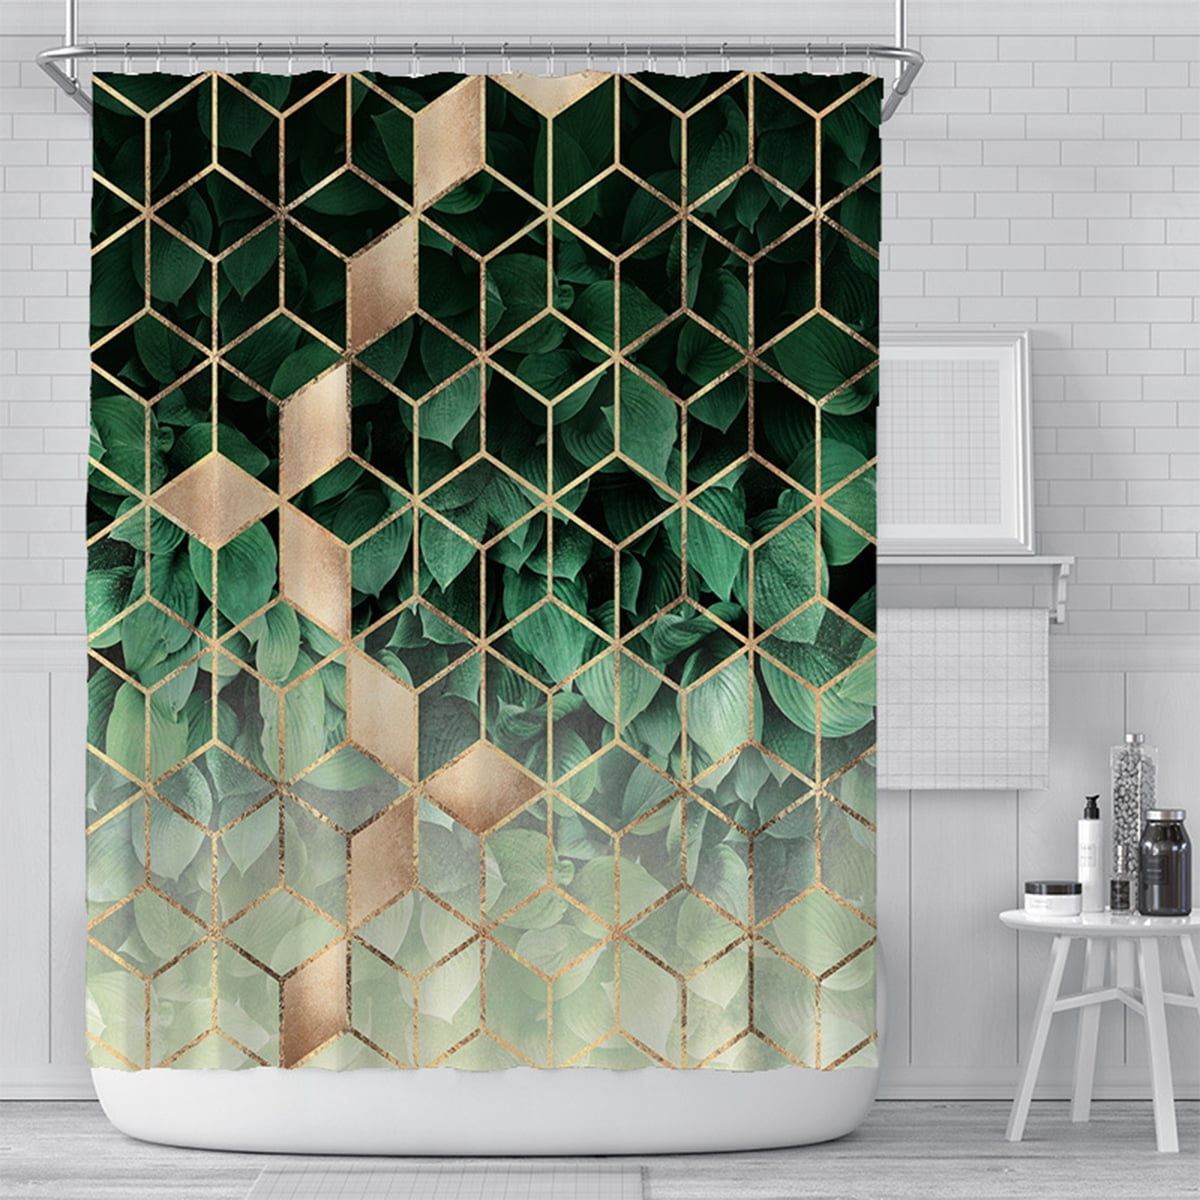 71" X 71" New Elegant Fabric Shower Curtain In Different Patterns 180 X 180CM 